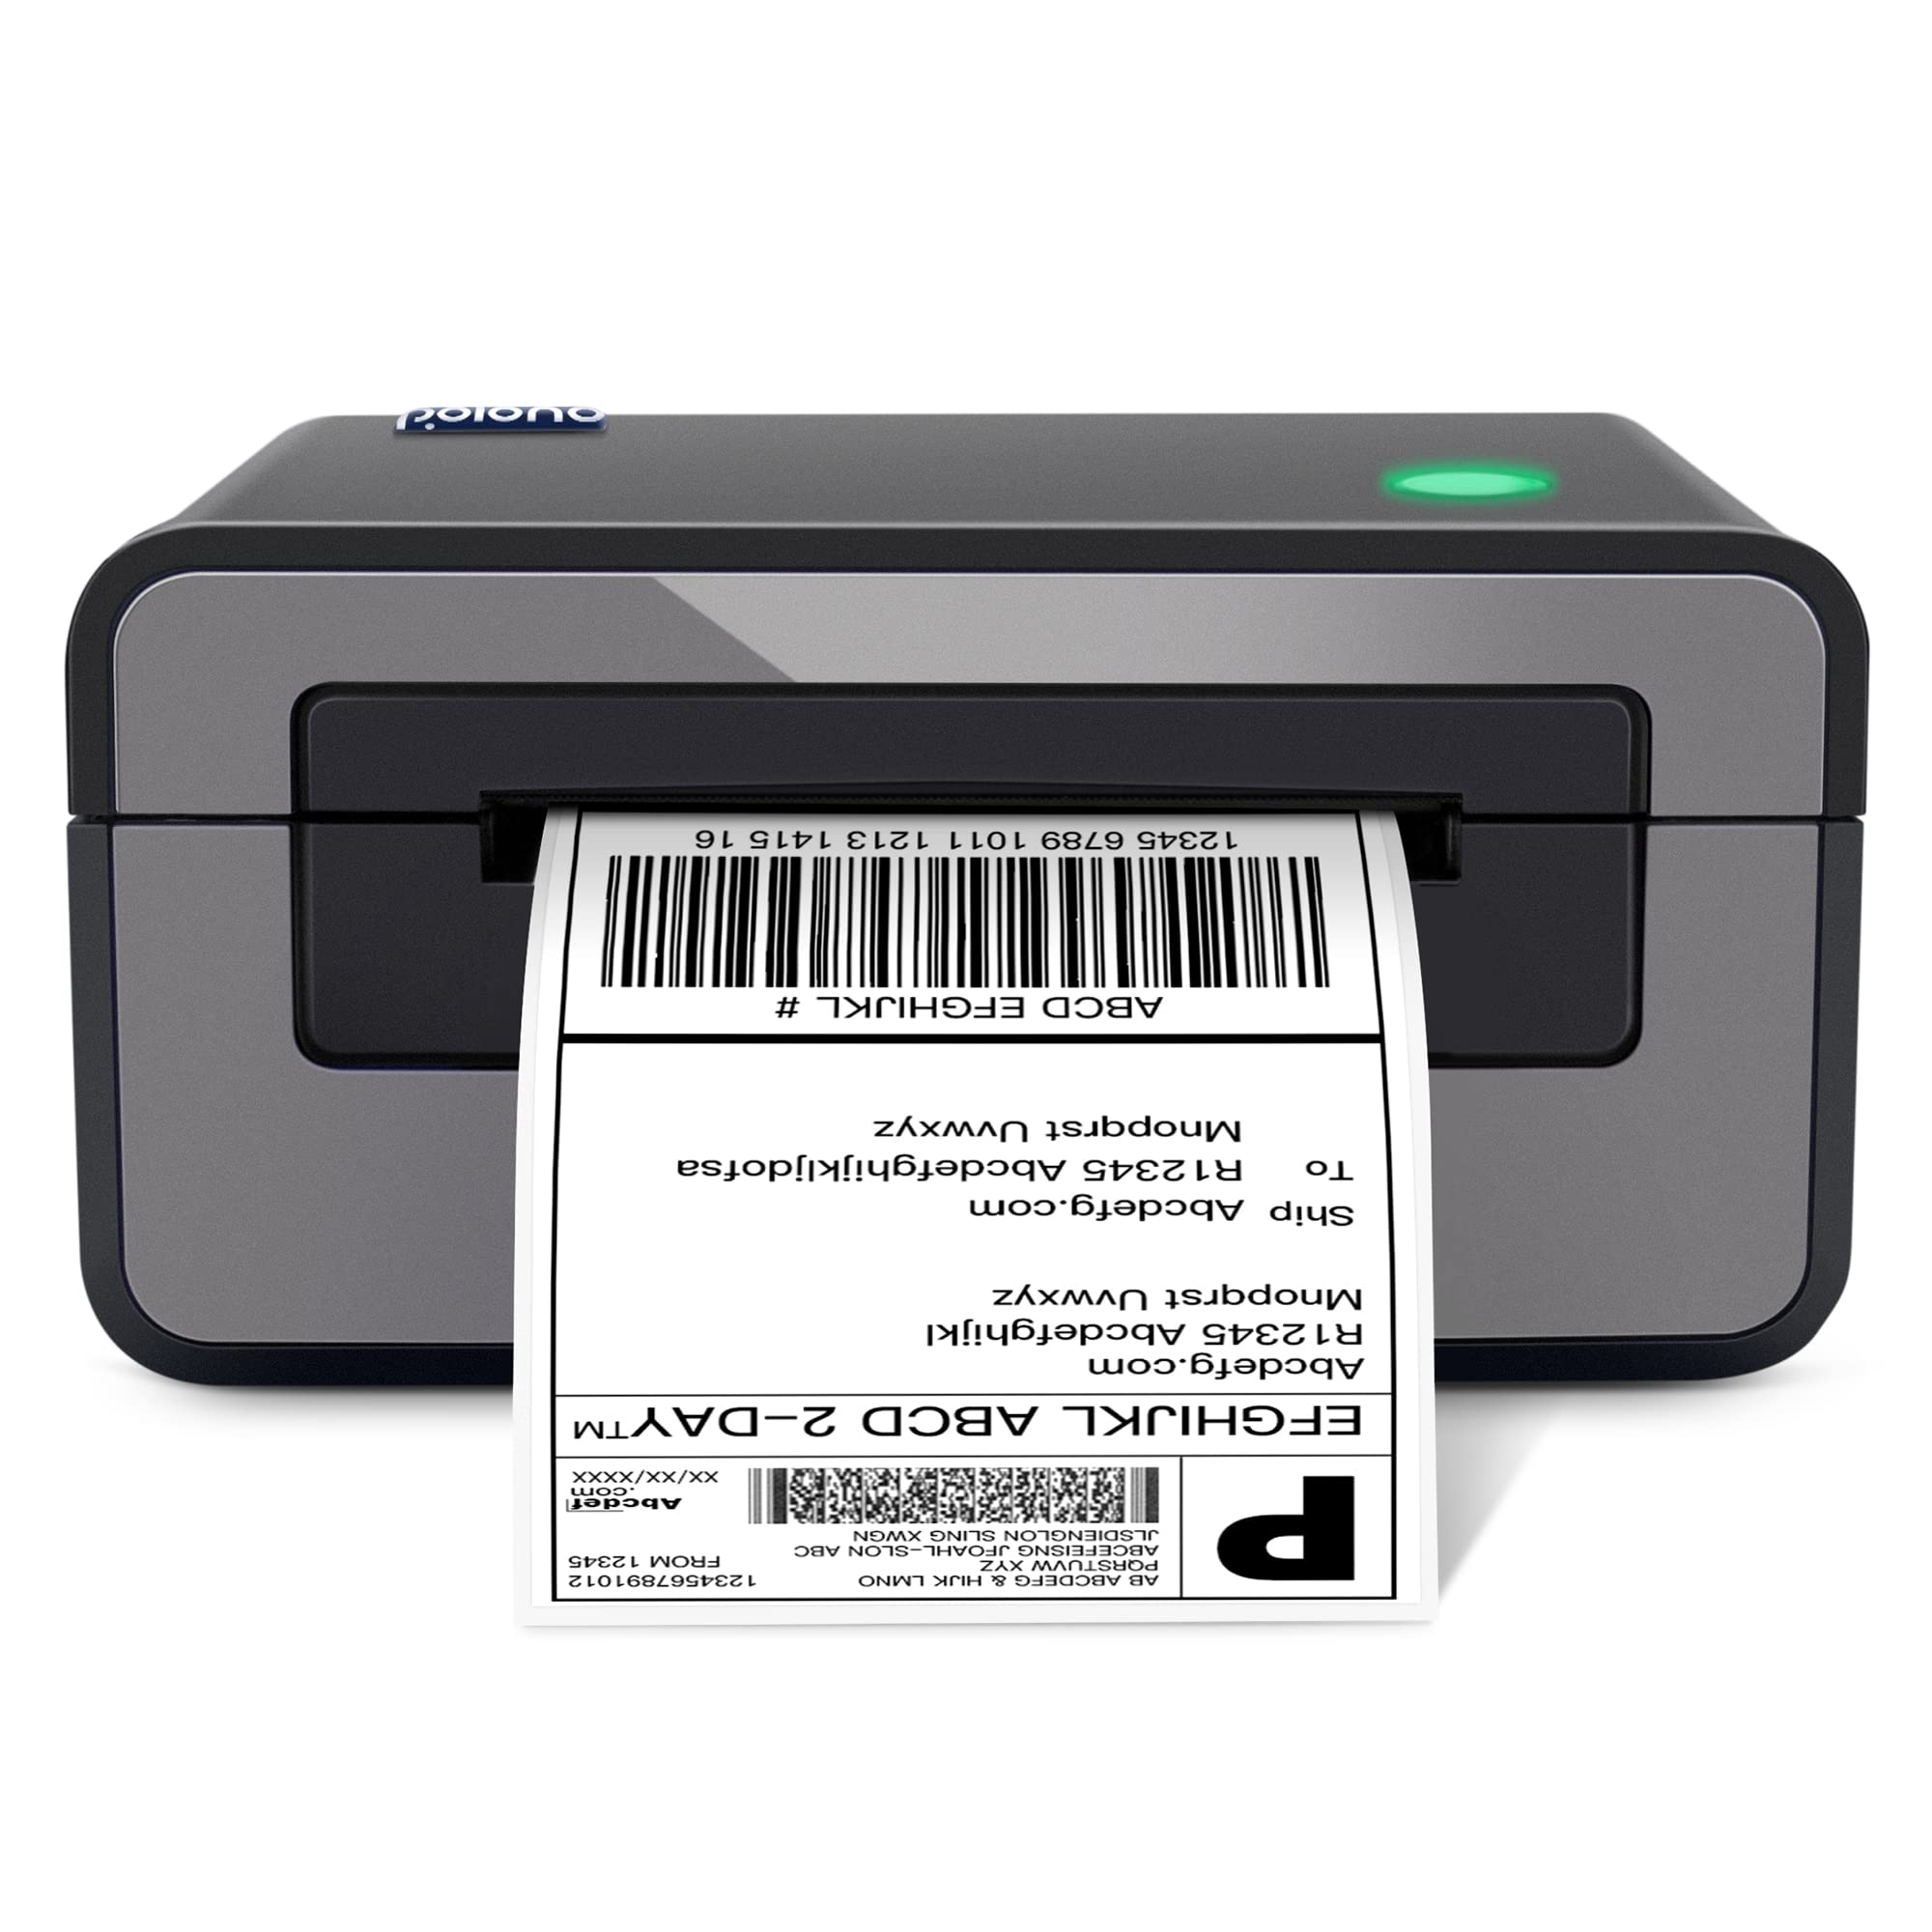 POLONO Thermal Label Printer,  PL60 4x6 Label Printer for Shipping Packages, Thermal Label Maker, Compatible with Amazon, Ebay, Etsy, Shopify, FedEx, UPS, etc, Support Windows, Mac, Linux (Gray)